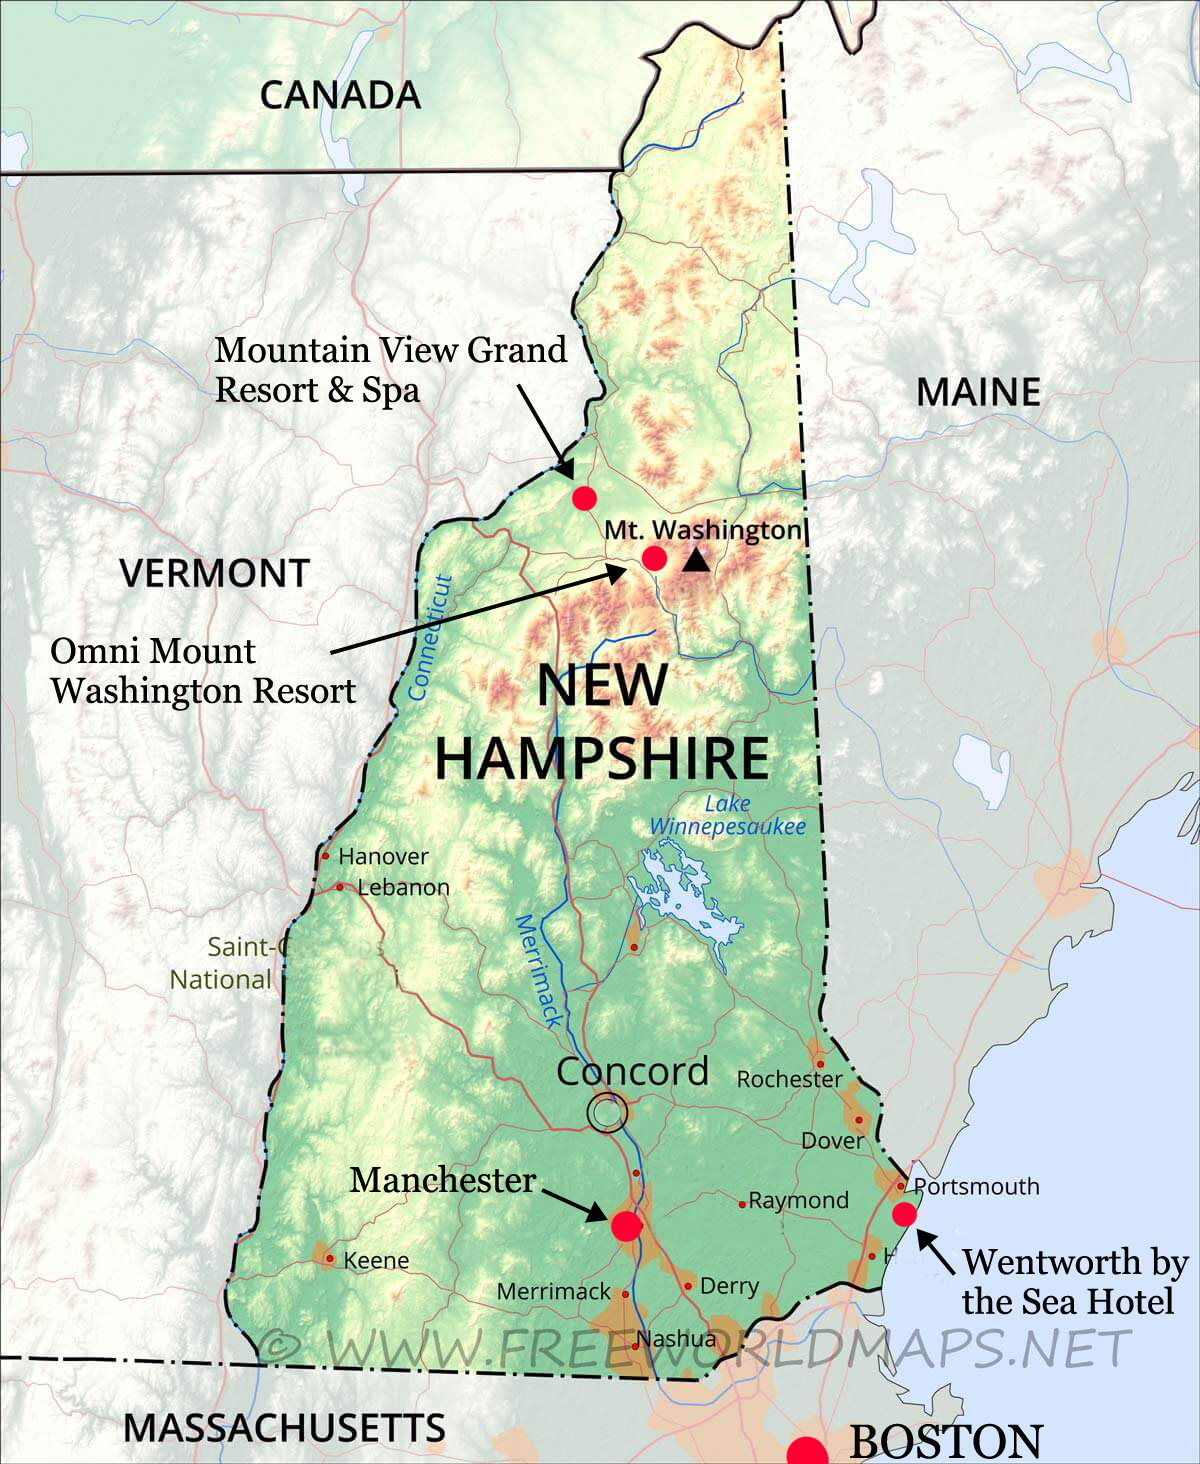 New Hampshire Bike Tours Active Vacations Great Bike Tours